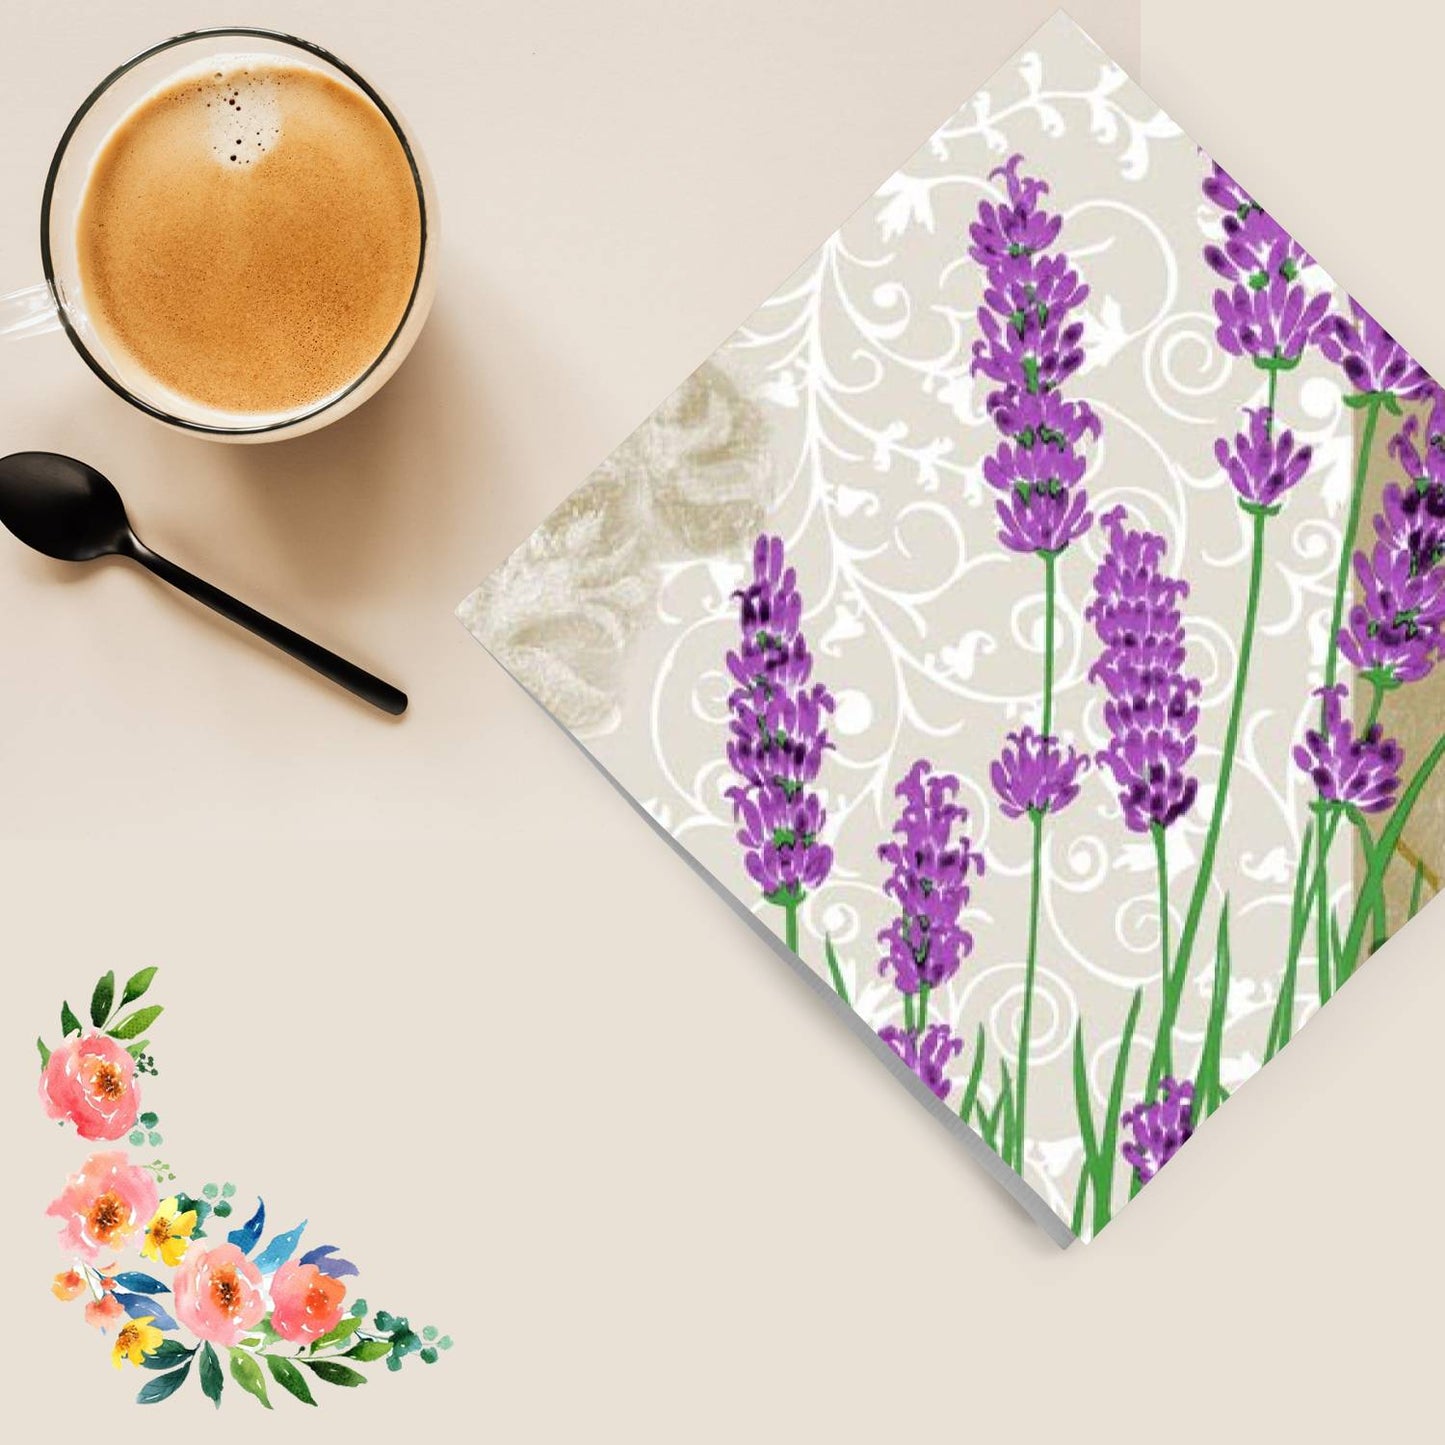 Lavender Disposable Lunch Paper Napkins 20 Ct Tablesettings Nicole Fantini Collection   